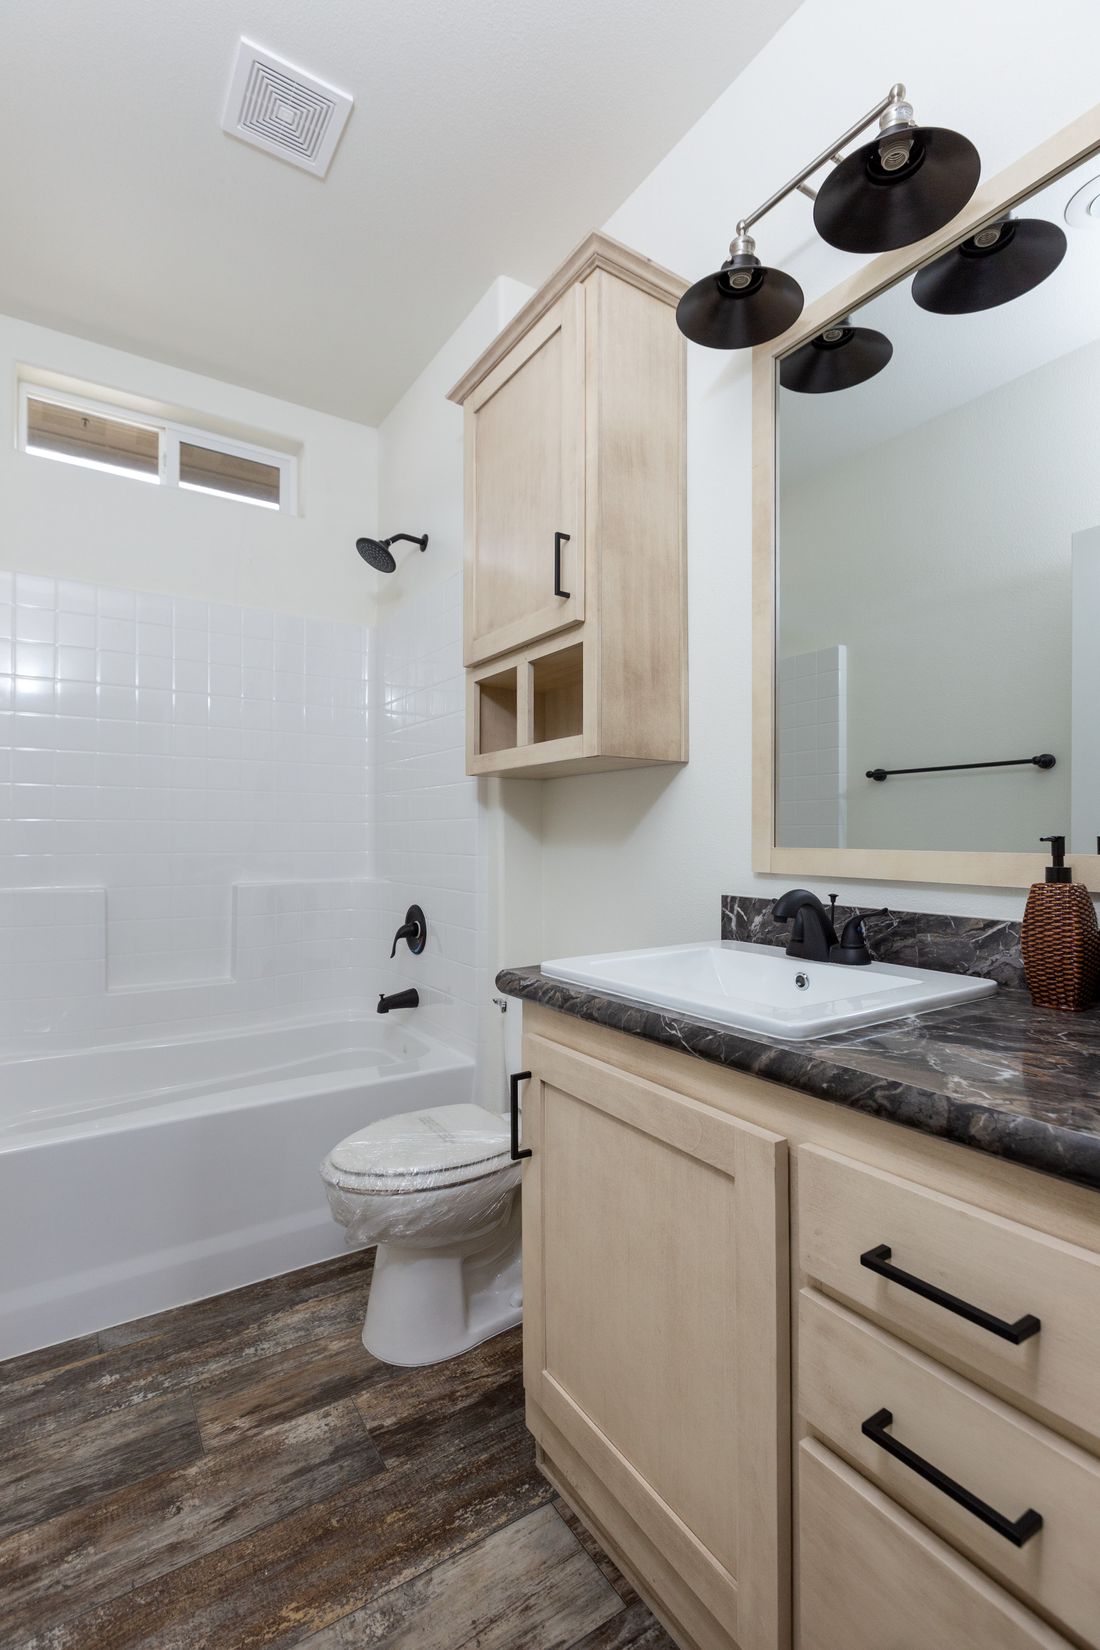 The 2848 MARLETTE SPECIAL Guest Bathroom. This Manufactured Mobile Home features 3 bedrooms and 2 baths.